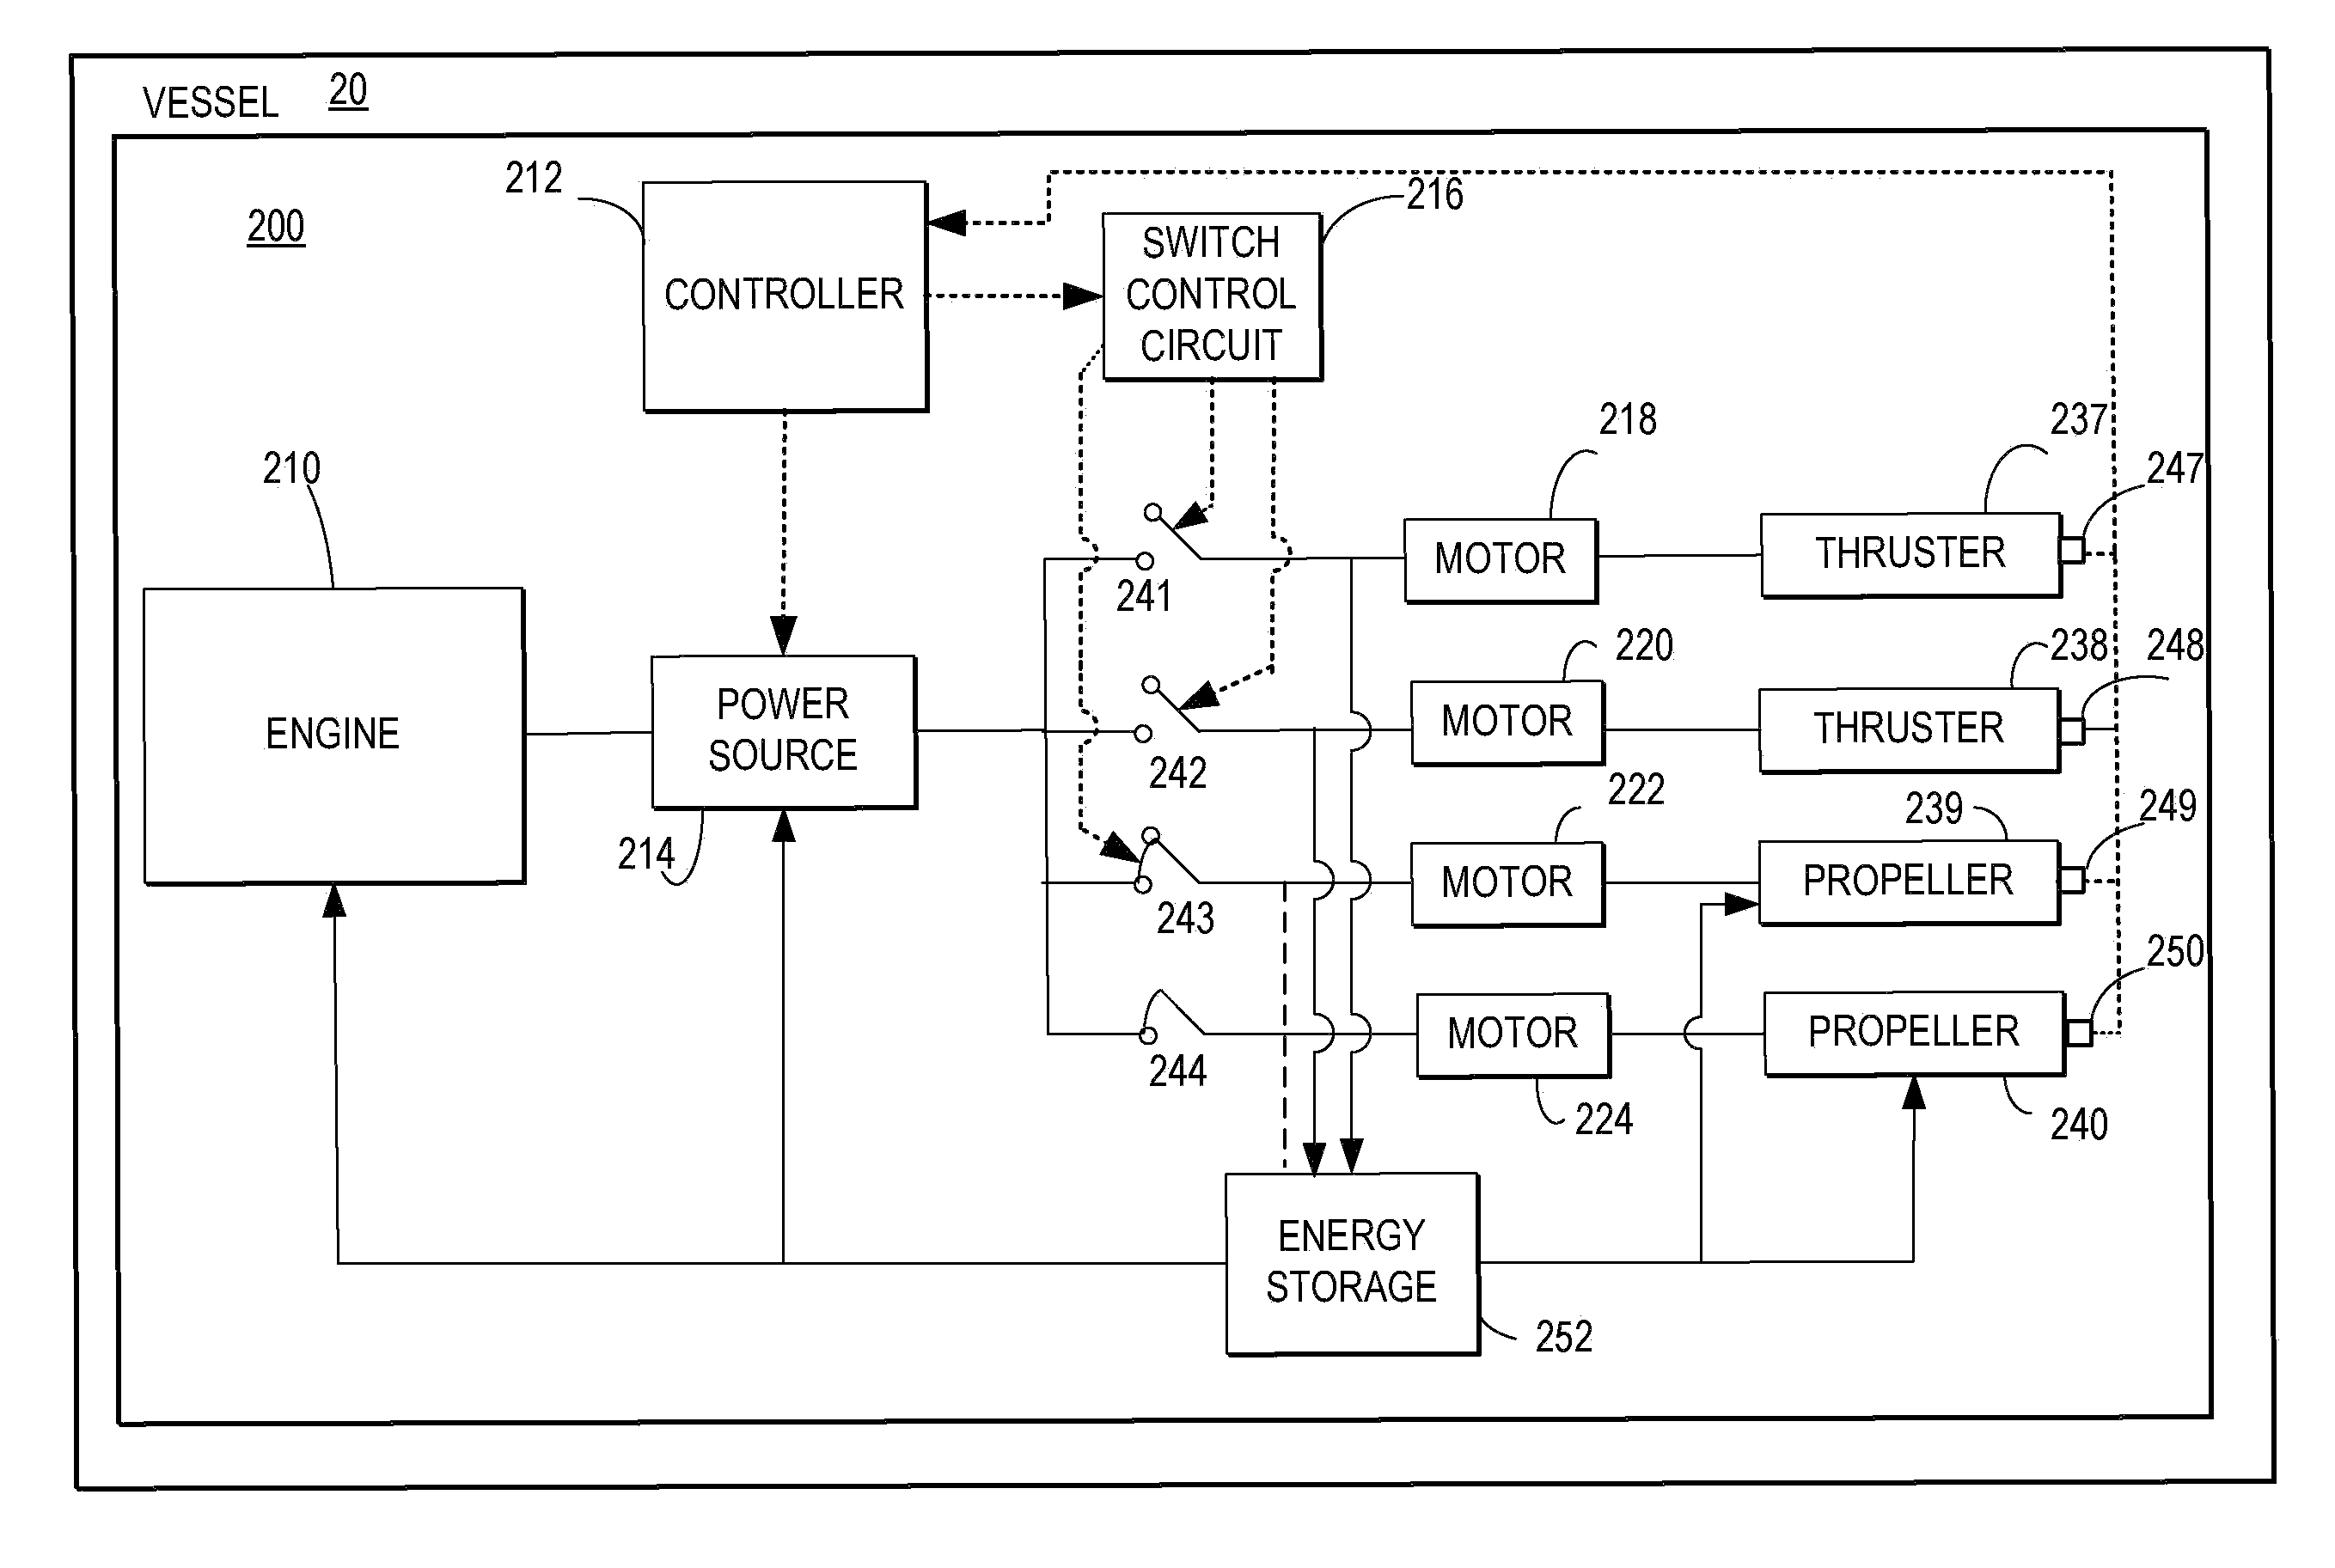 System and method for dynamic energy recovery in marine propulsion